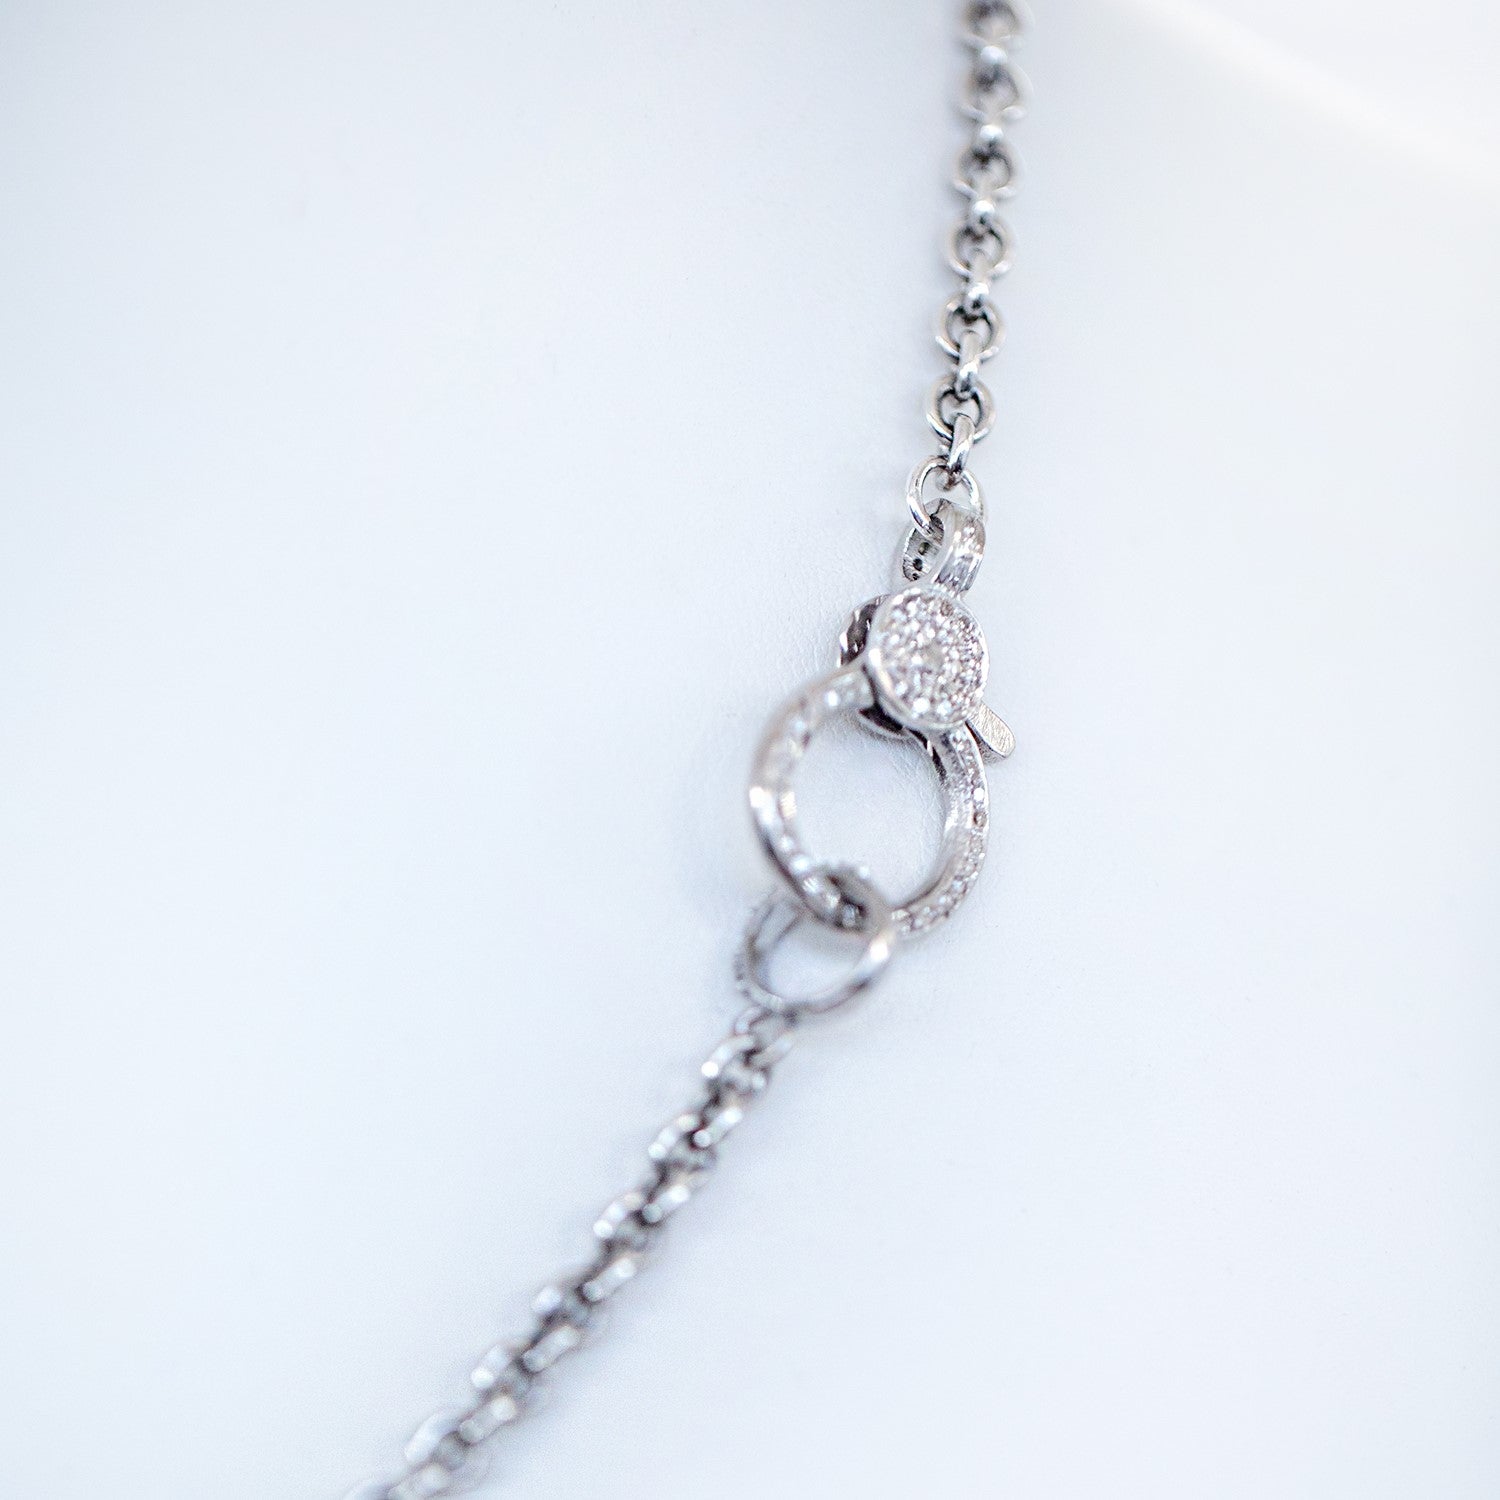 Long Cable Chain Necklace with Diamond Claw Clasp NB000216 - TBird